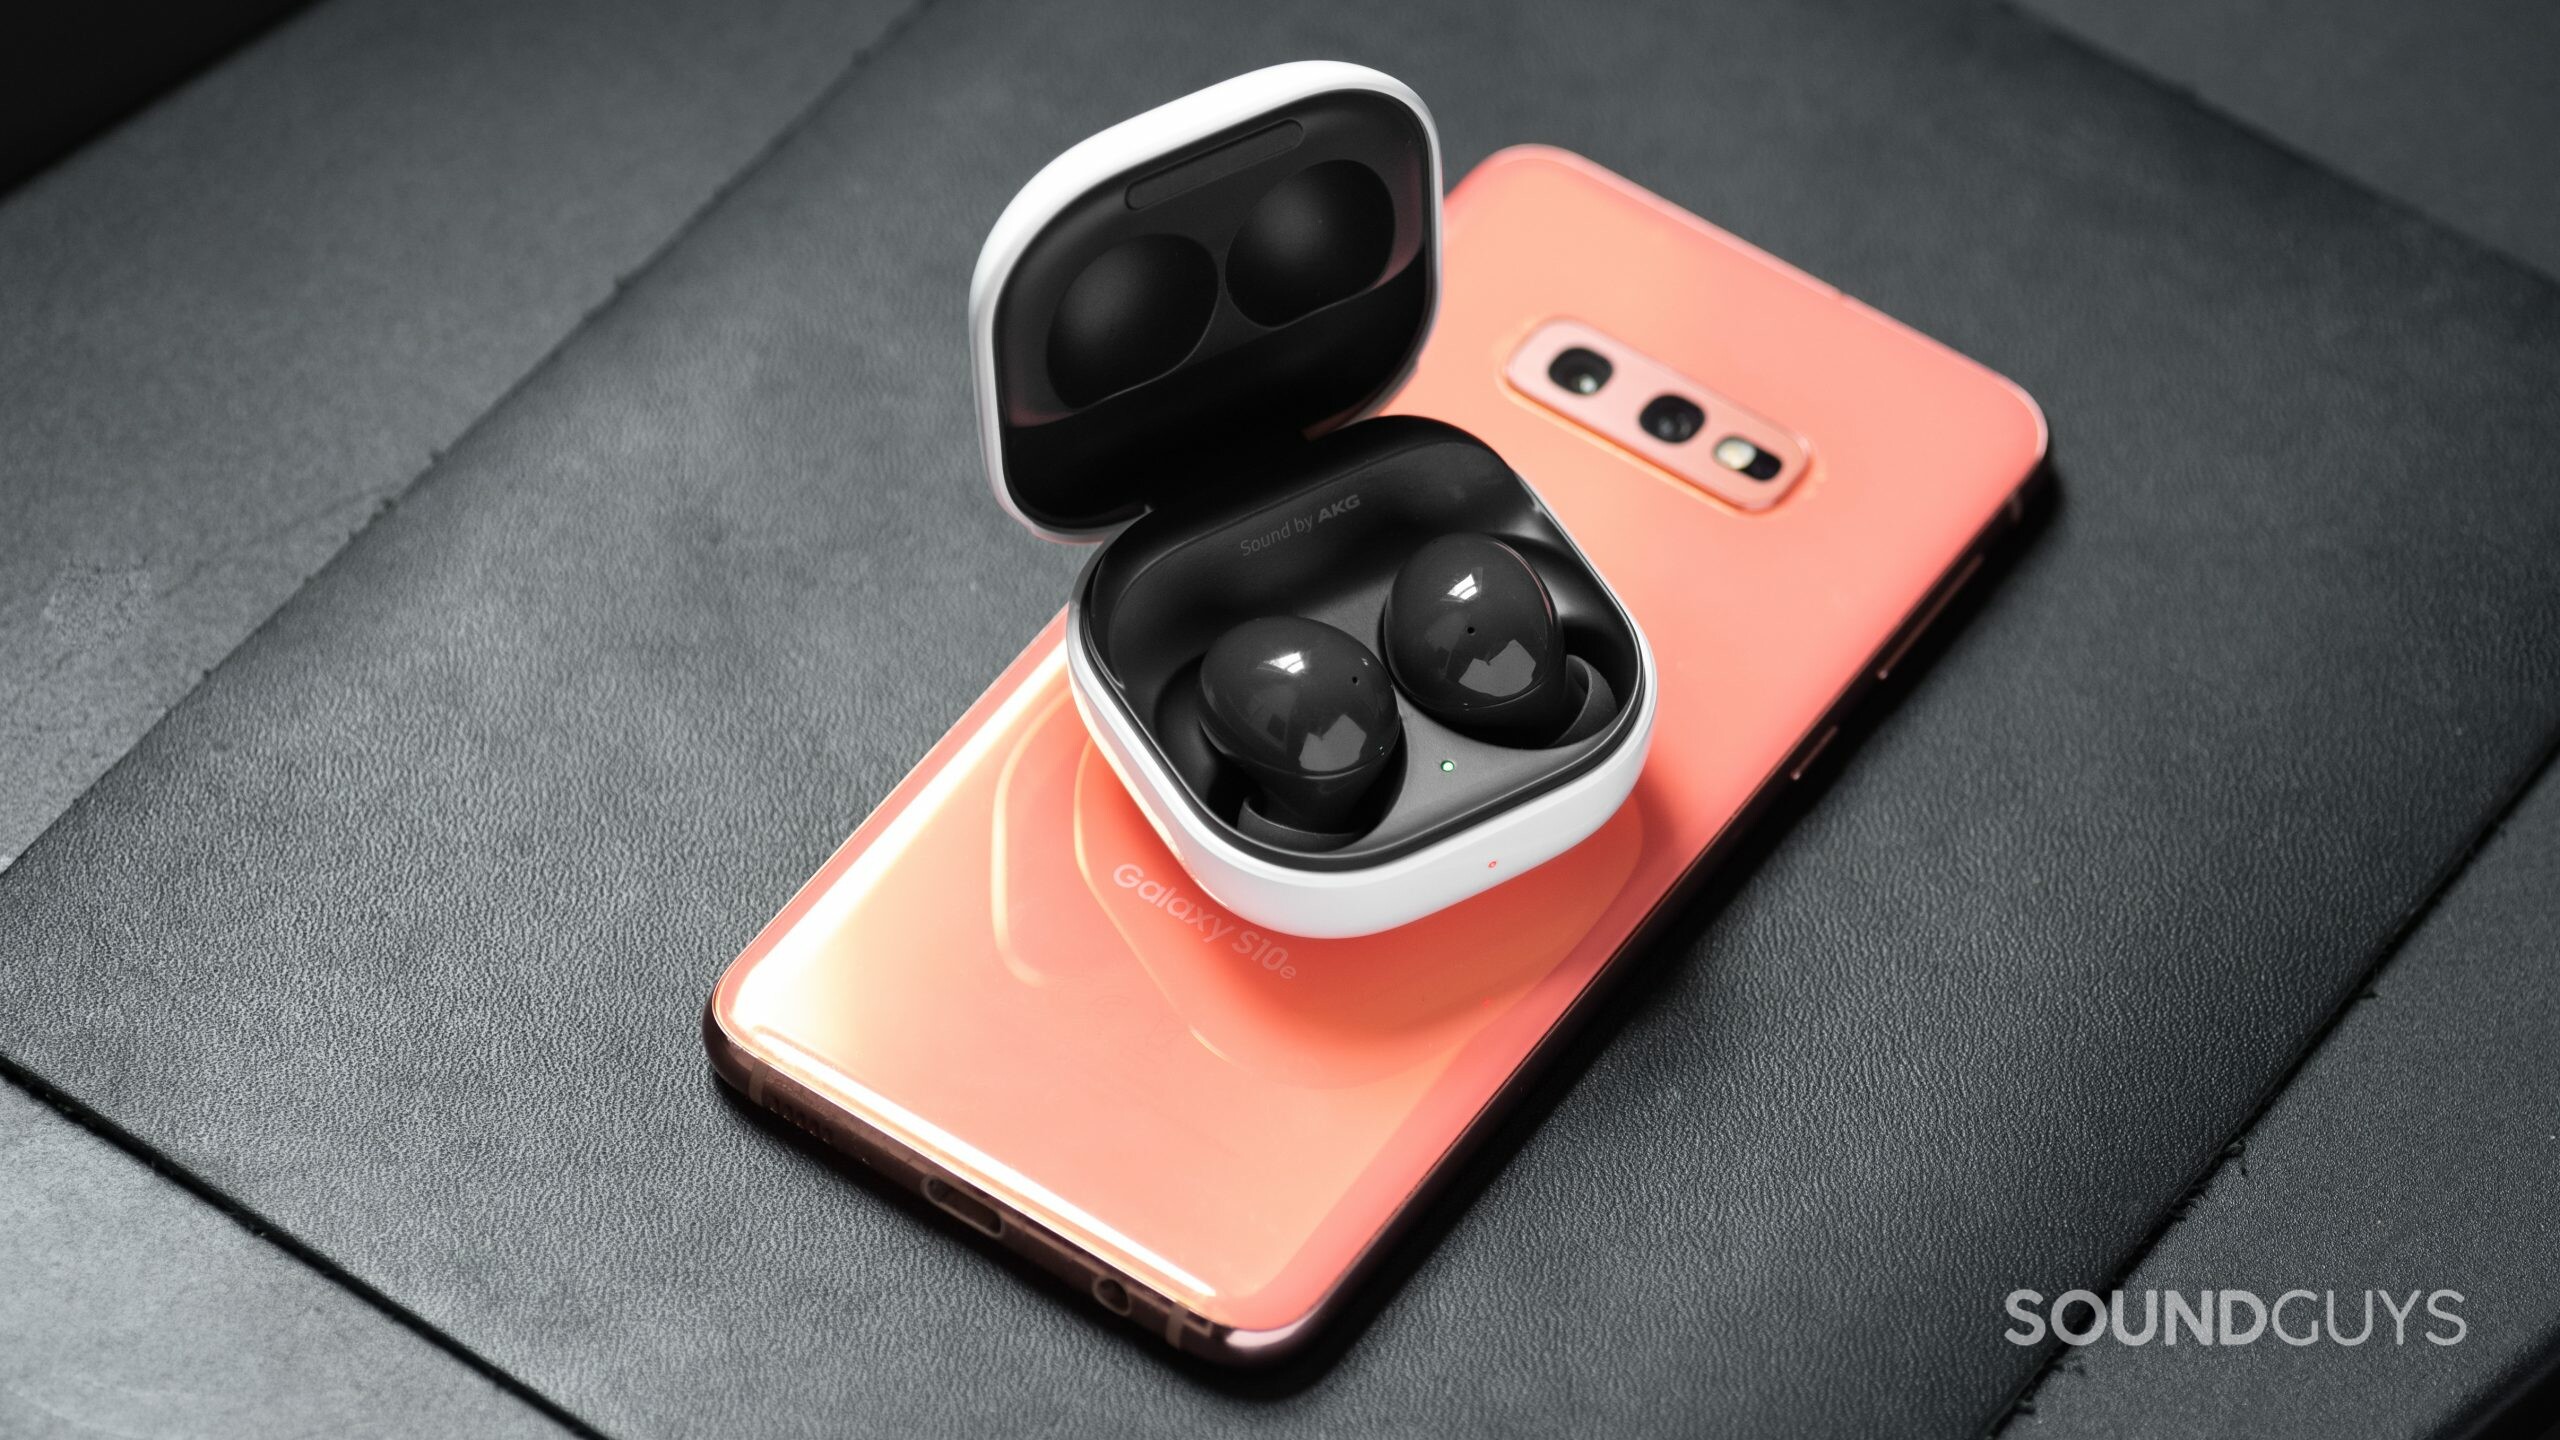 The Samsung Galaxy Buds 2 noise canceling true wireless earphones in the open charging case on top of a Samsung Galaxy S10e smartphone in pink.